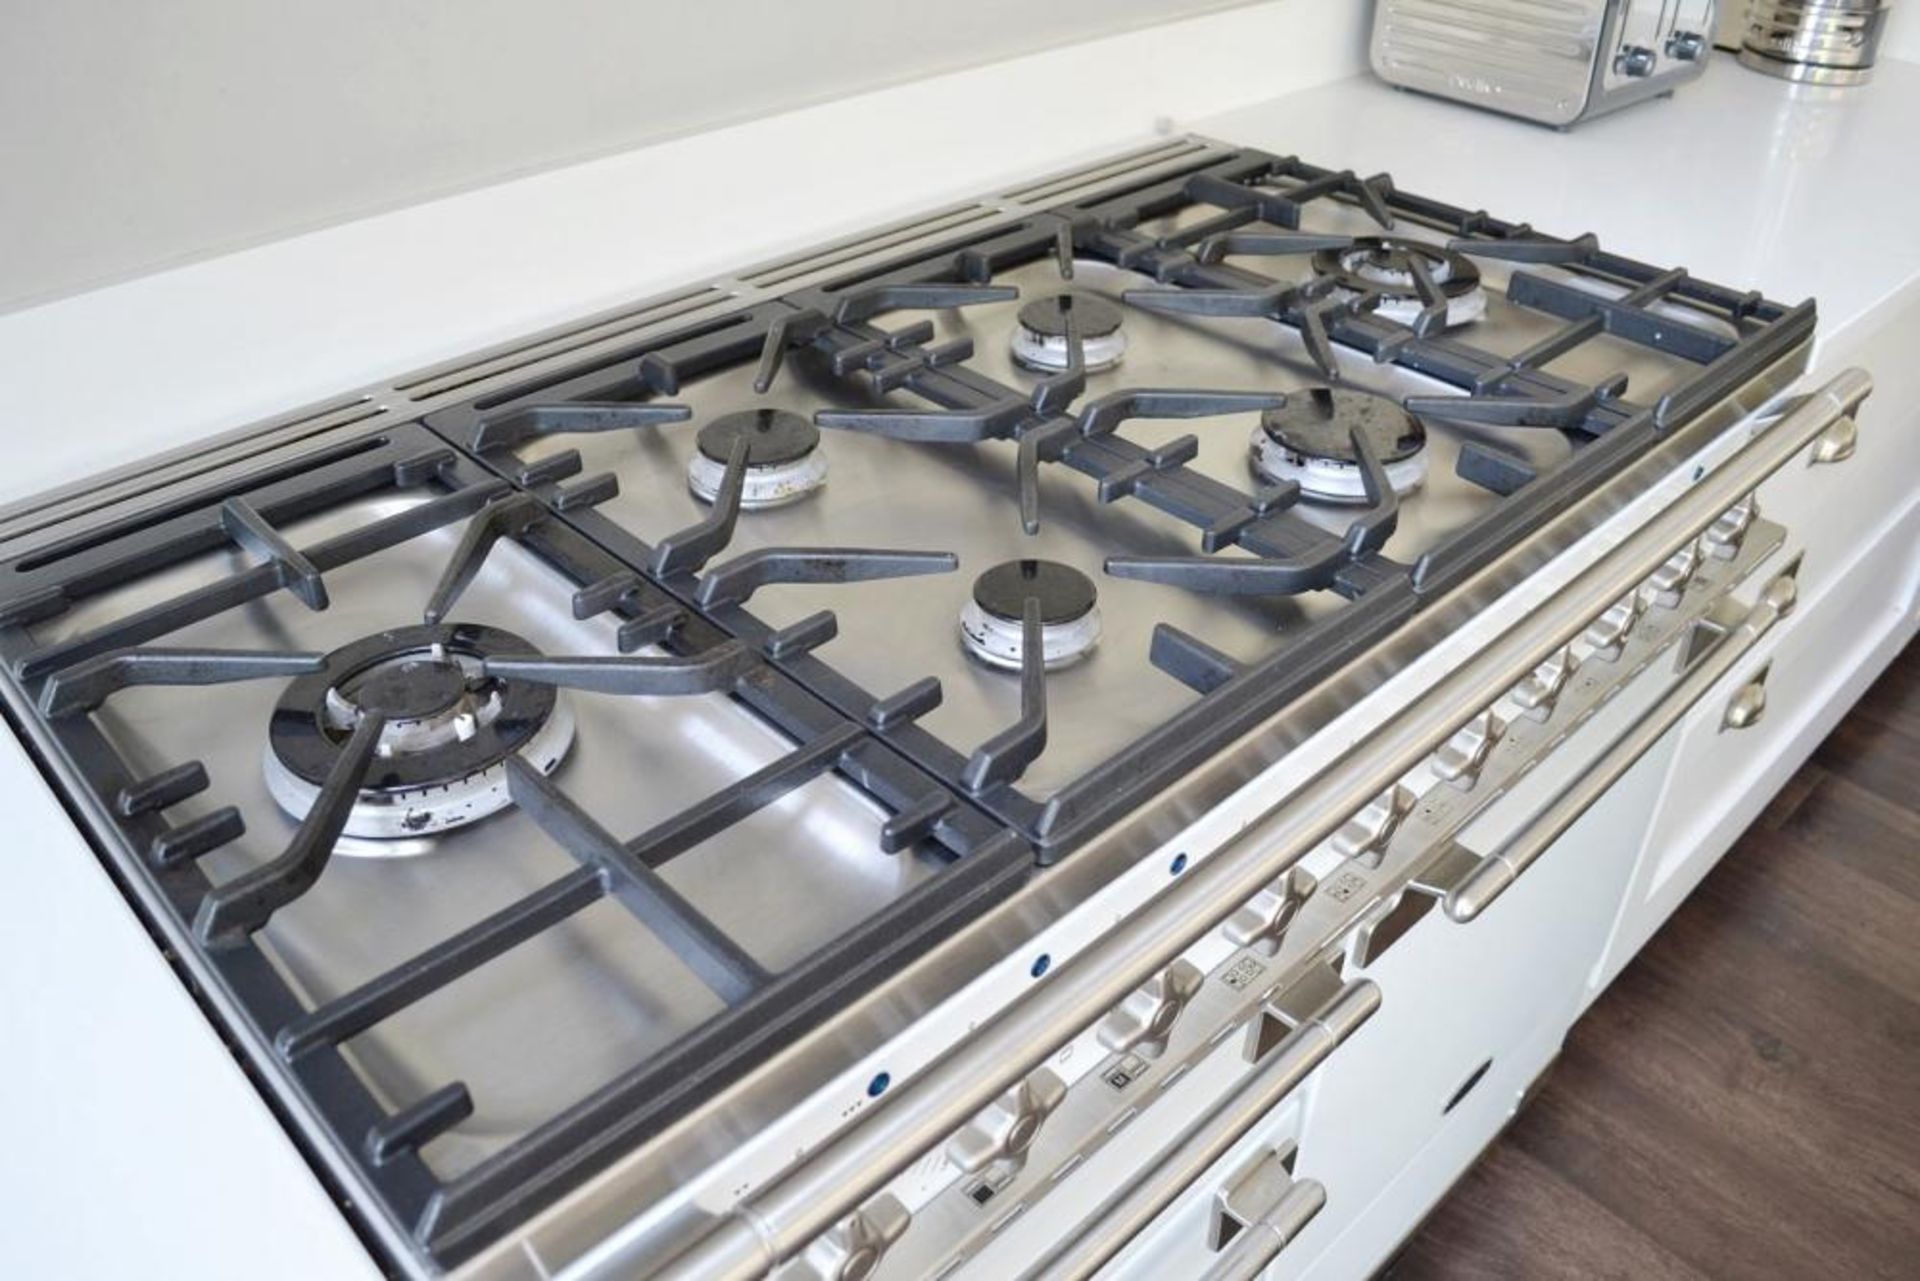 1 x Rangemaster Alise 110cm 6-Burner Gas Cooker In White And Brushed Steel - Used In Very Good, Clea - Image 2 of 5